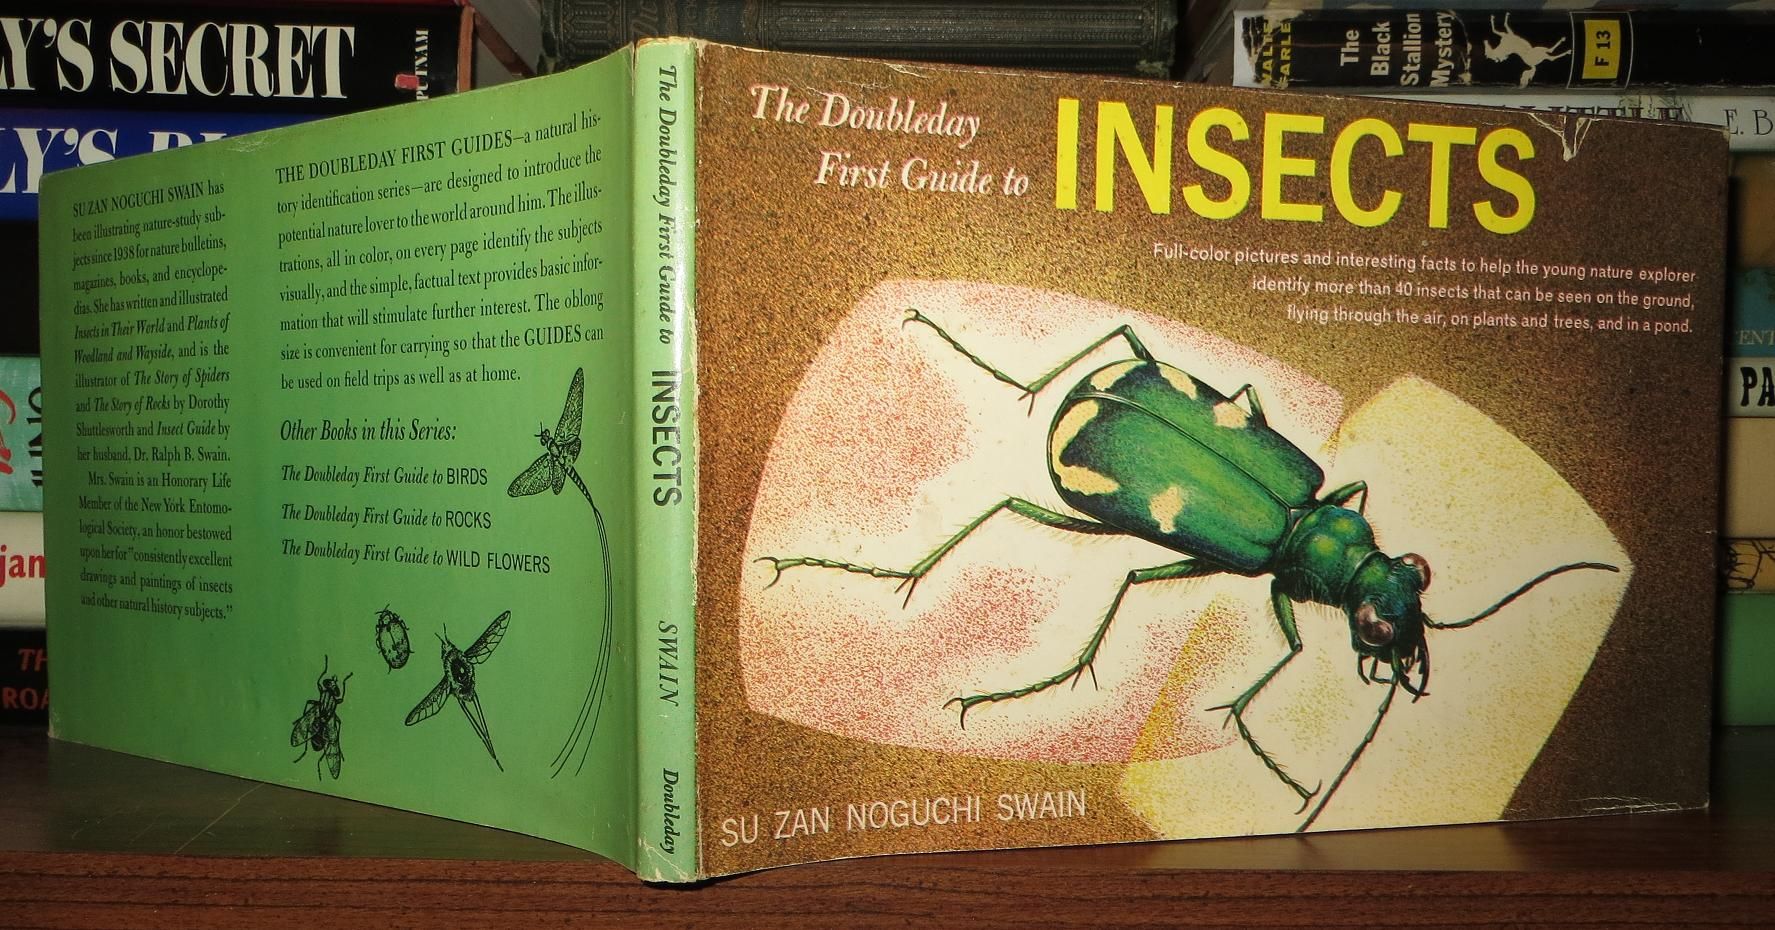 SWAIN, SU ZAN NOGUCHI - The Doubleday First Guide to Insects